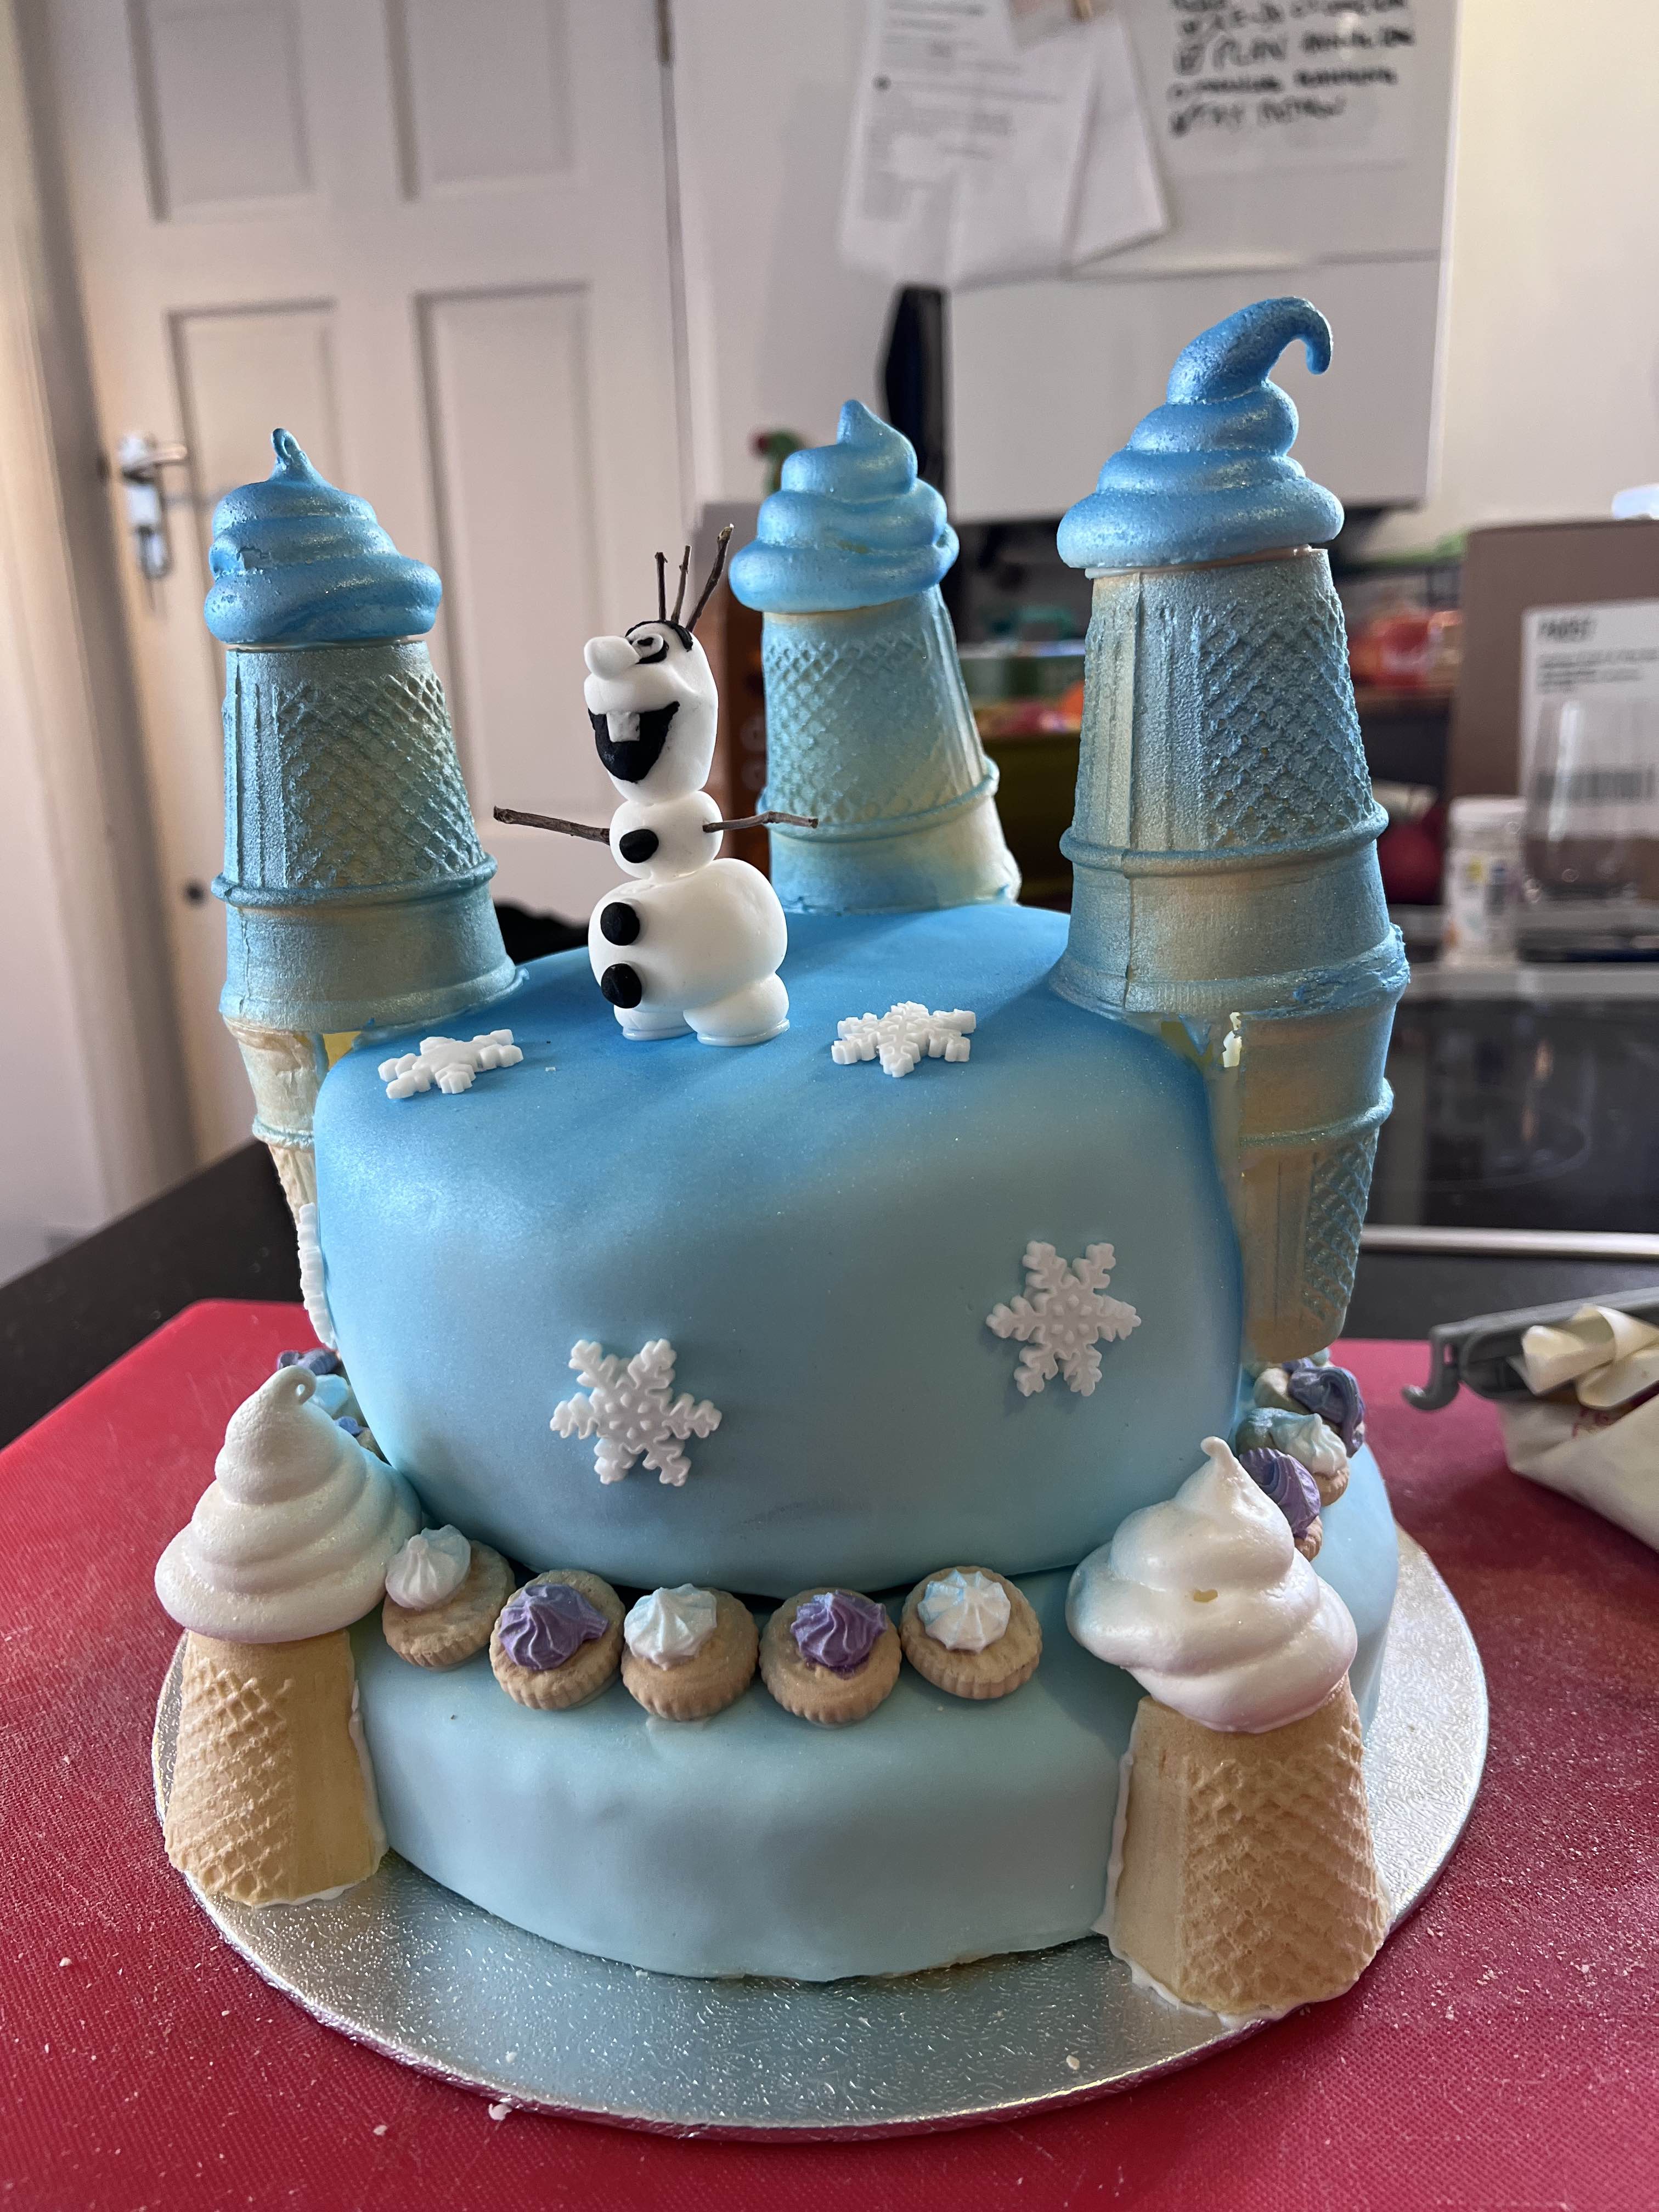 Blue castle cake with ice cream cone and meringue turretts and Olaf the snowman